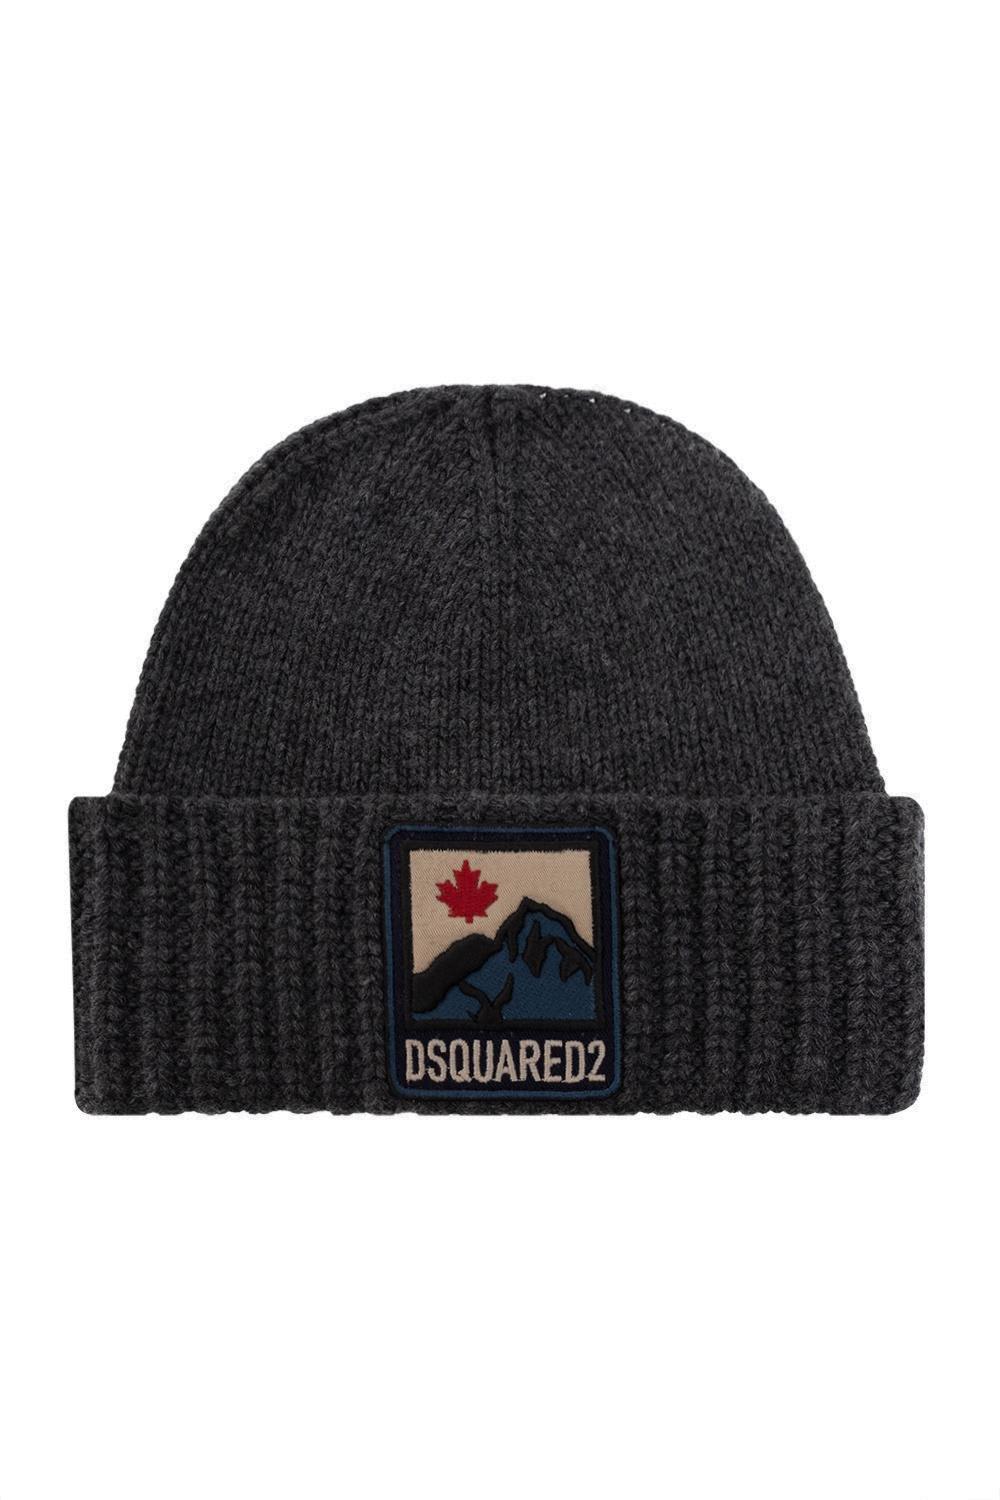 Dsquared2 Embroidered Logo Patch Knitted Beanie